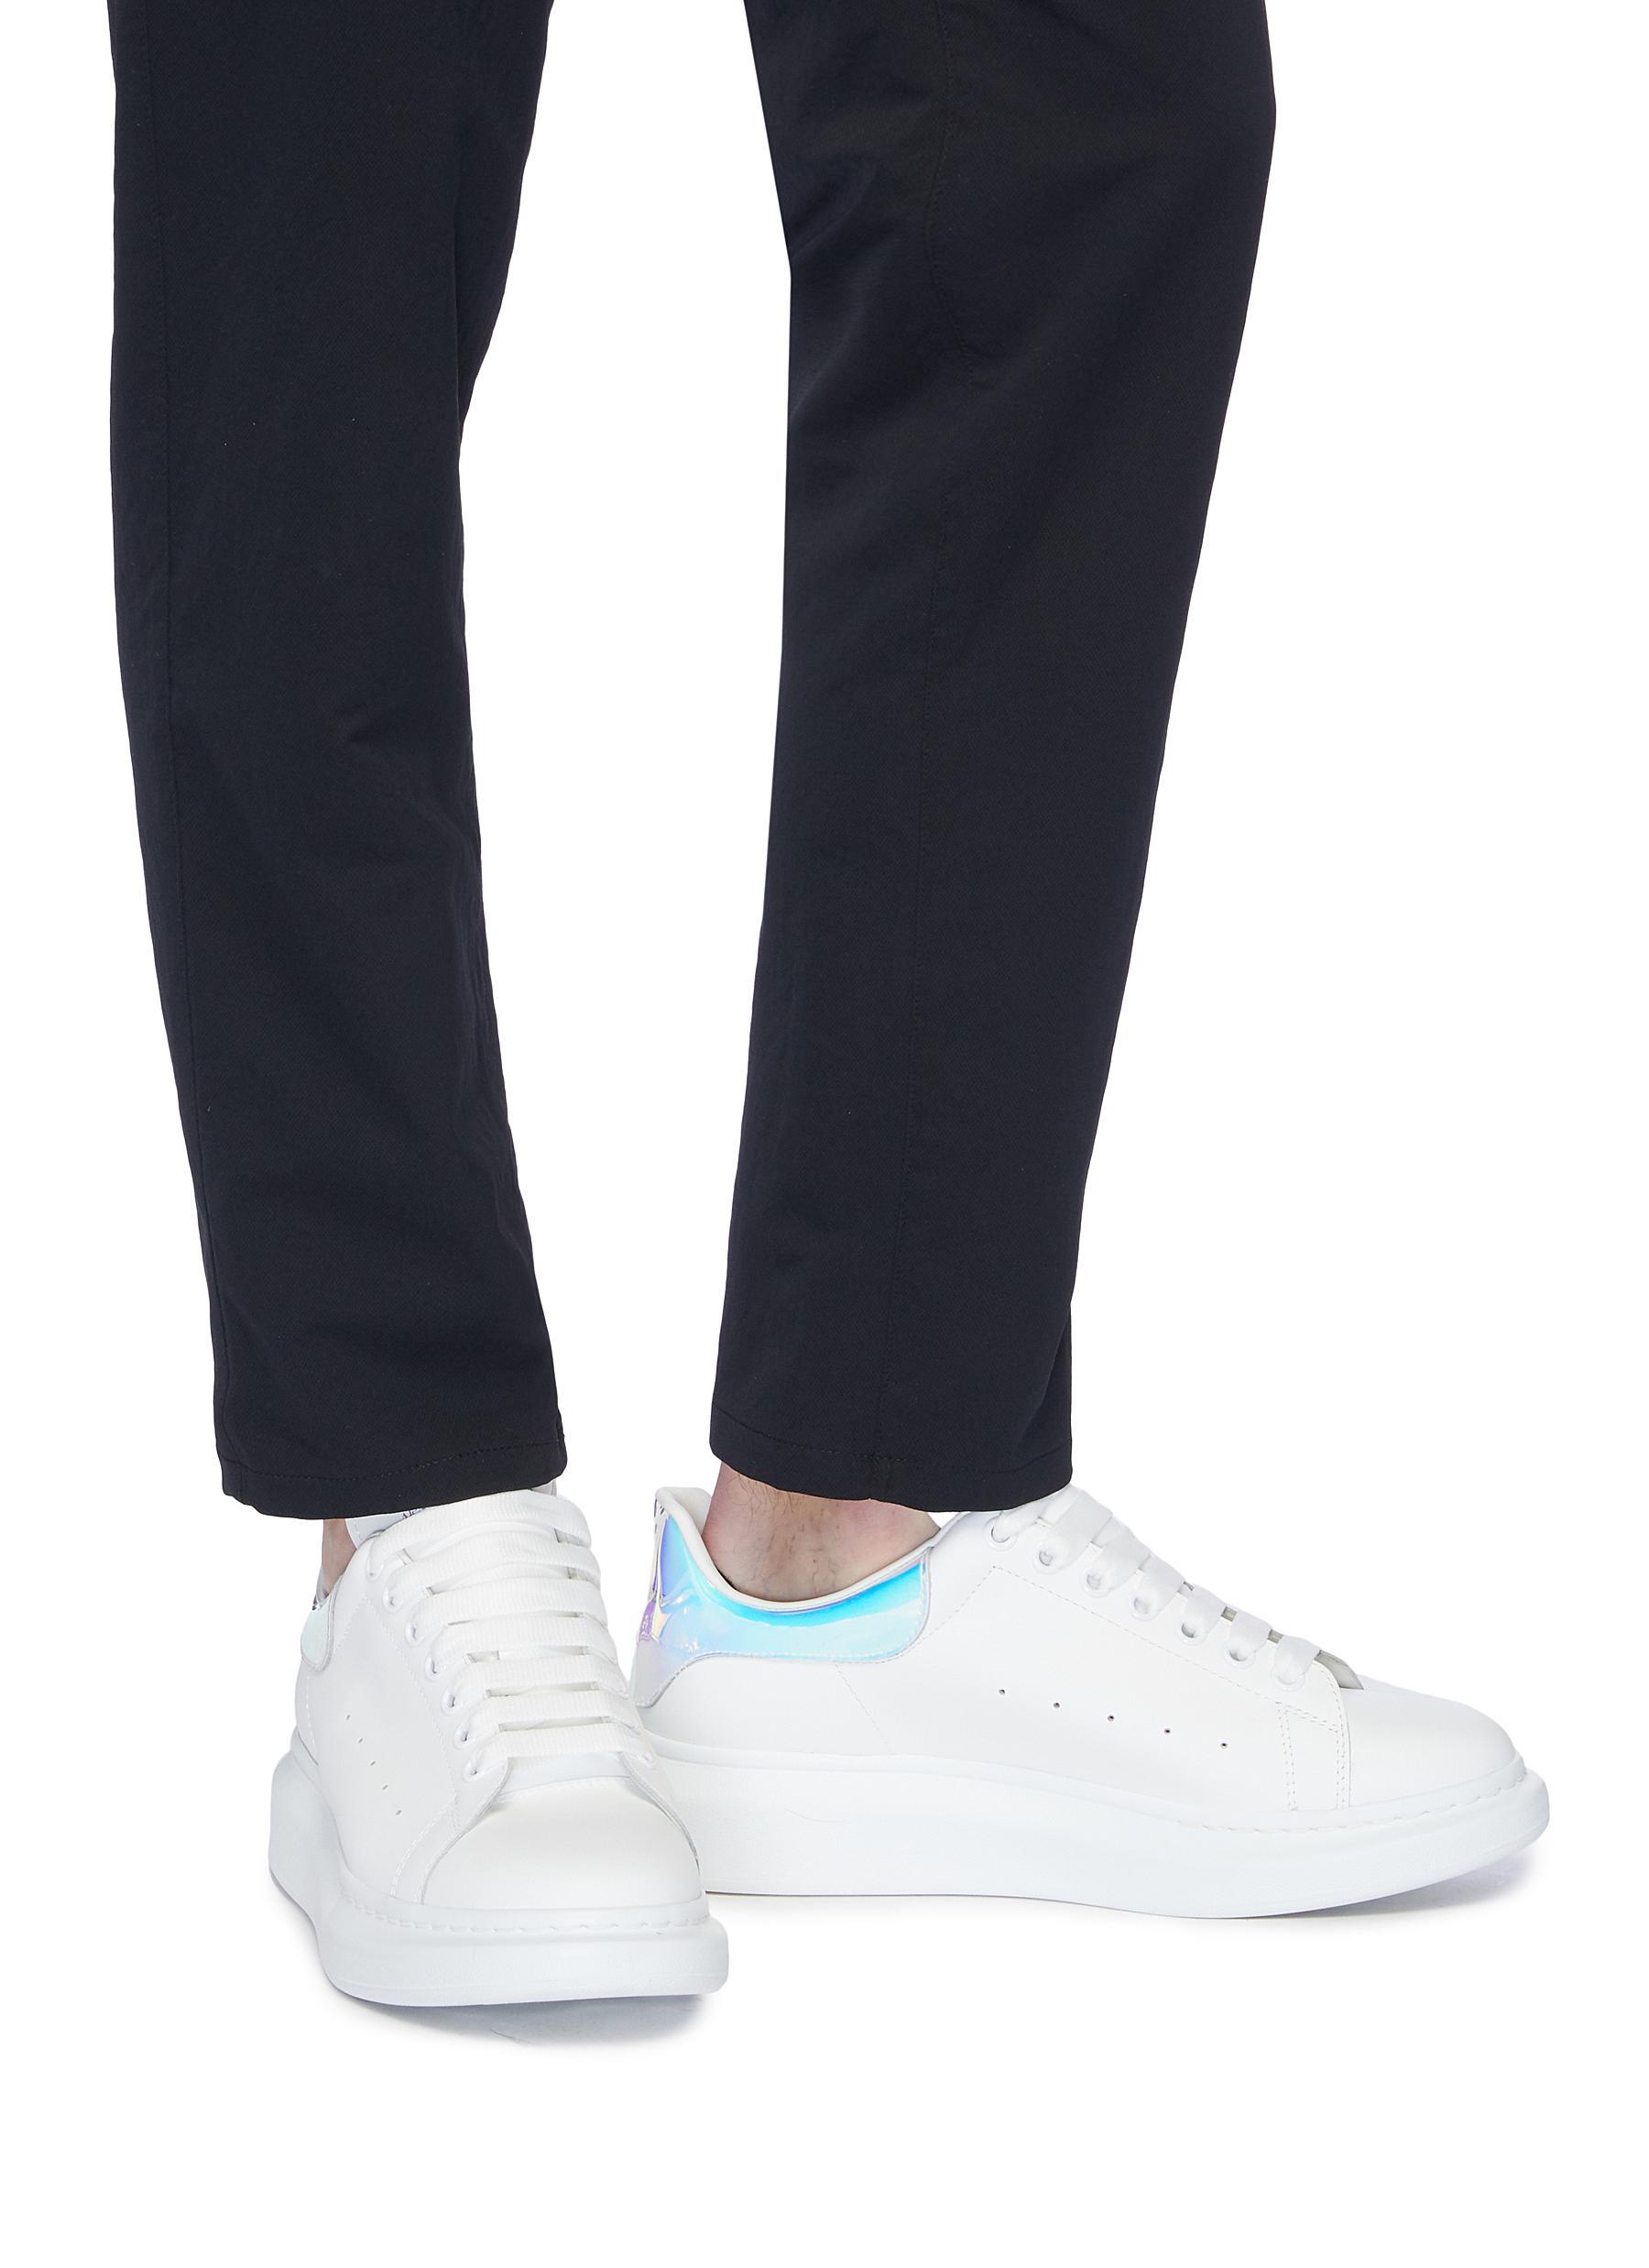 Alexander McQueen 'oversized Sneaker' In Leather With Holographic Collar in  White for Men - Lyst